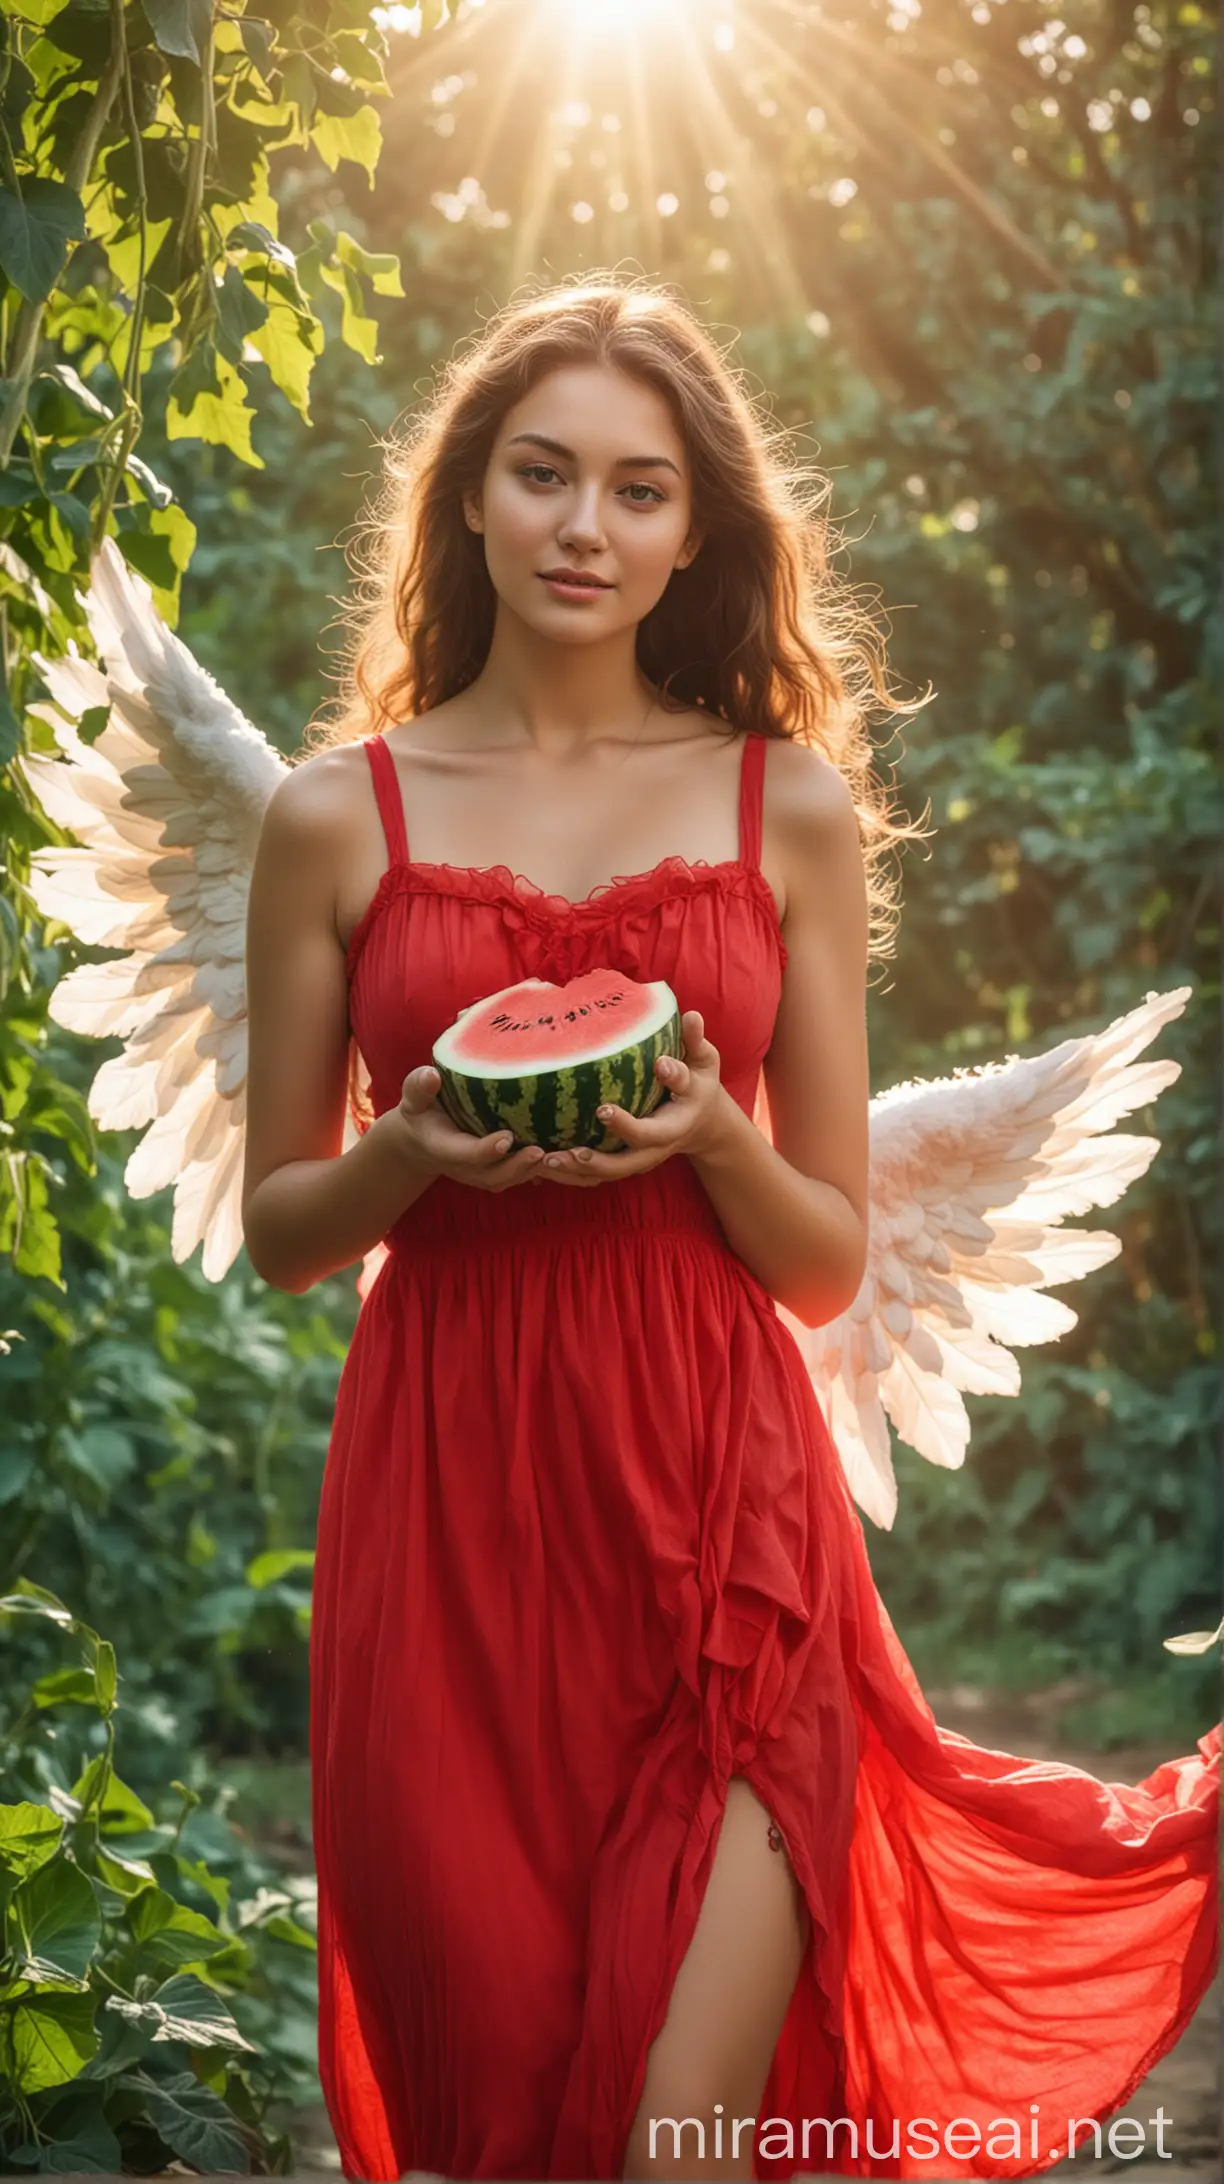 Beautiful Angel women and holding Watermelon on hand red dress, natural background, sun light effect, 4k, HDR, morning time weather